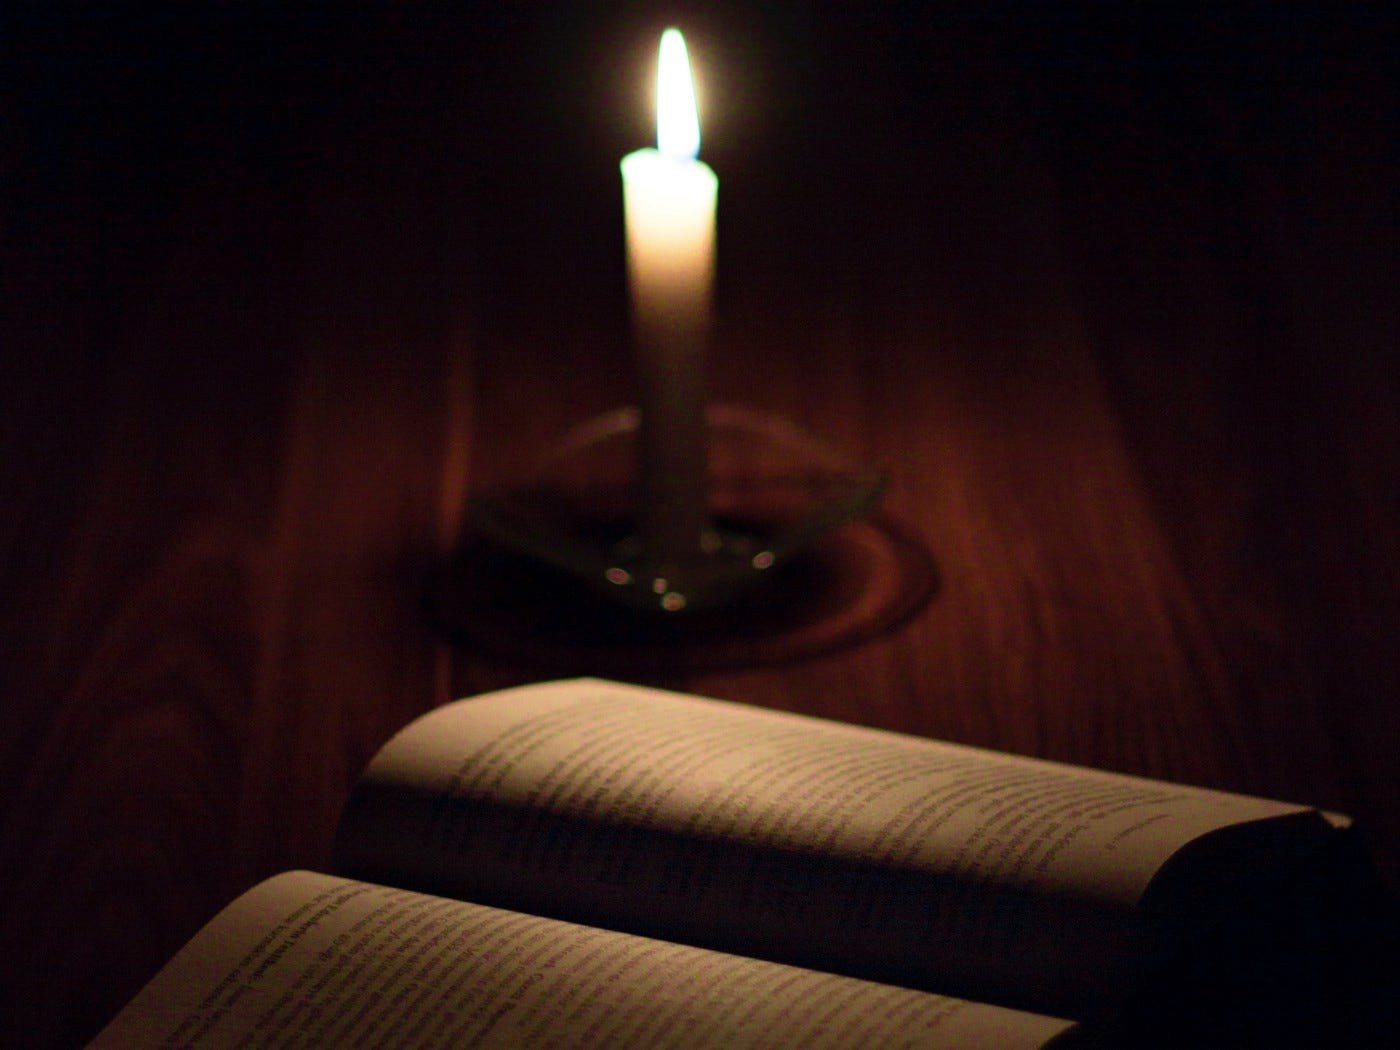 A photograph of a book and candle.